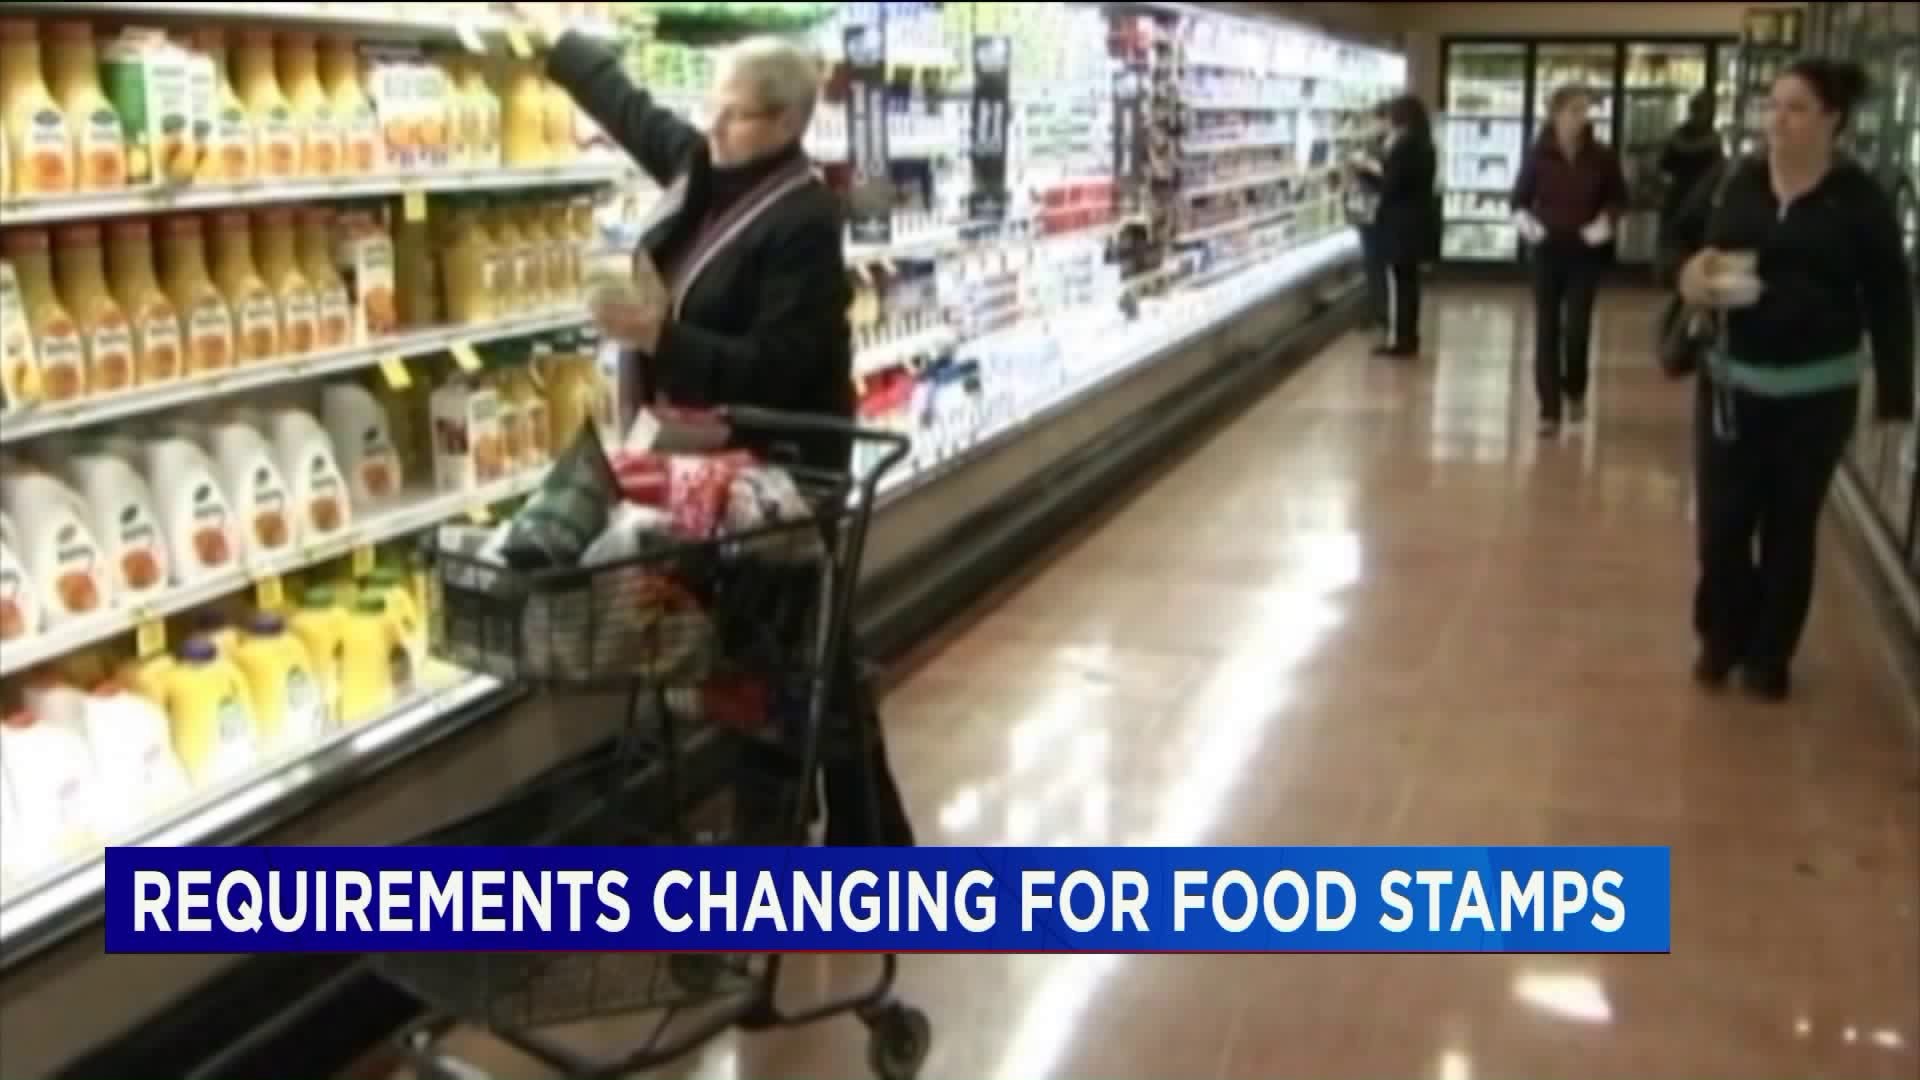 Requirements changing for food stamps